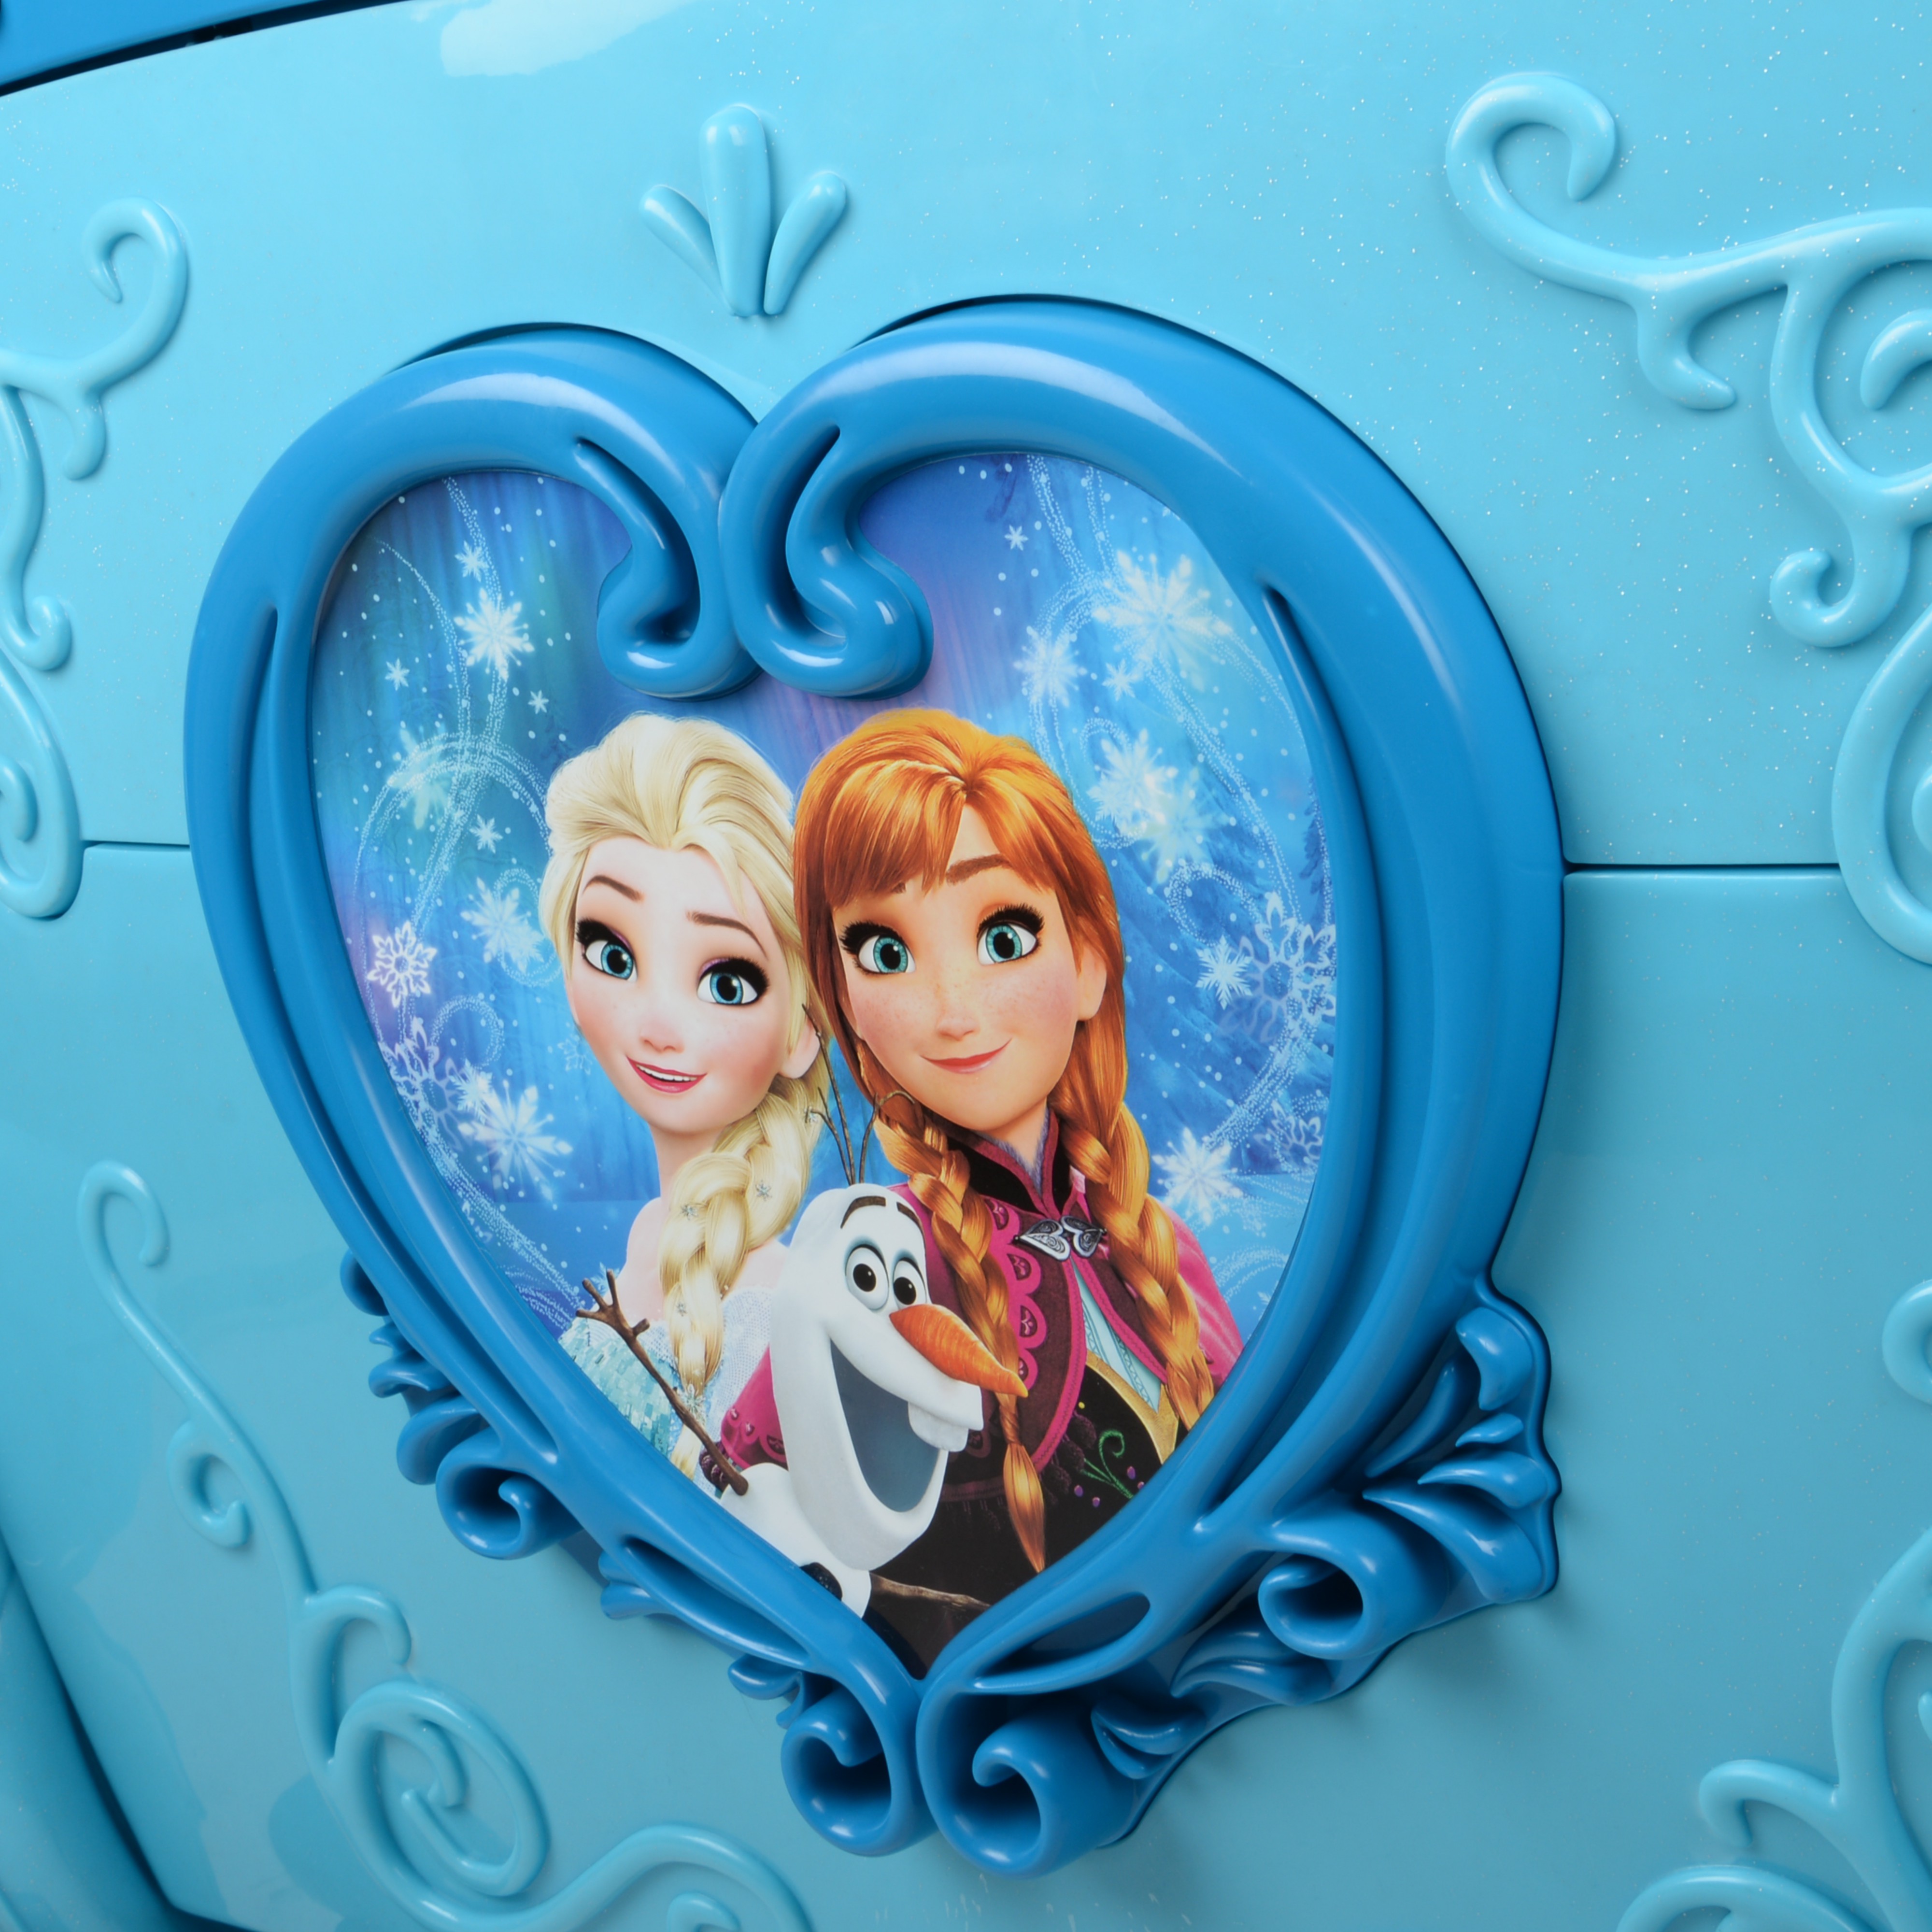 Disney Frozen Sleigh 12-Volt Battery Powered Ride-On for your little Elsa and Anna - Hours of Fun! - image 3 of 6